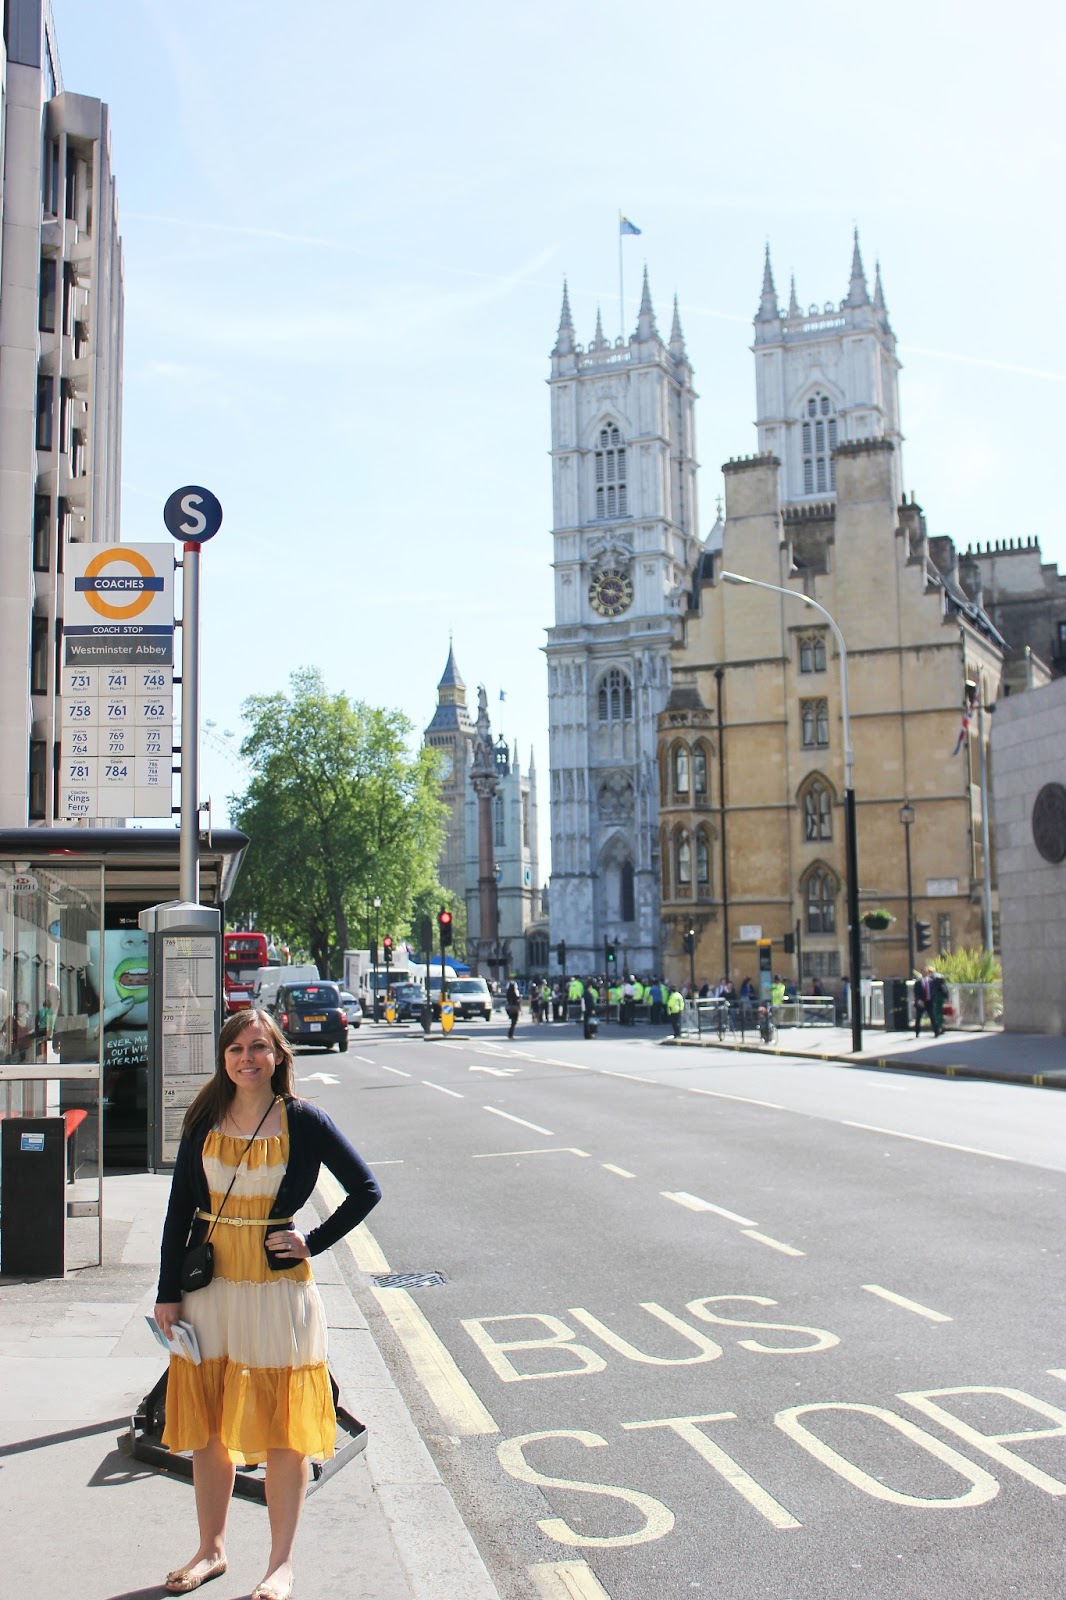 London Travel: Westminster Abbey: Running Into the Royal Family